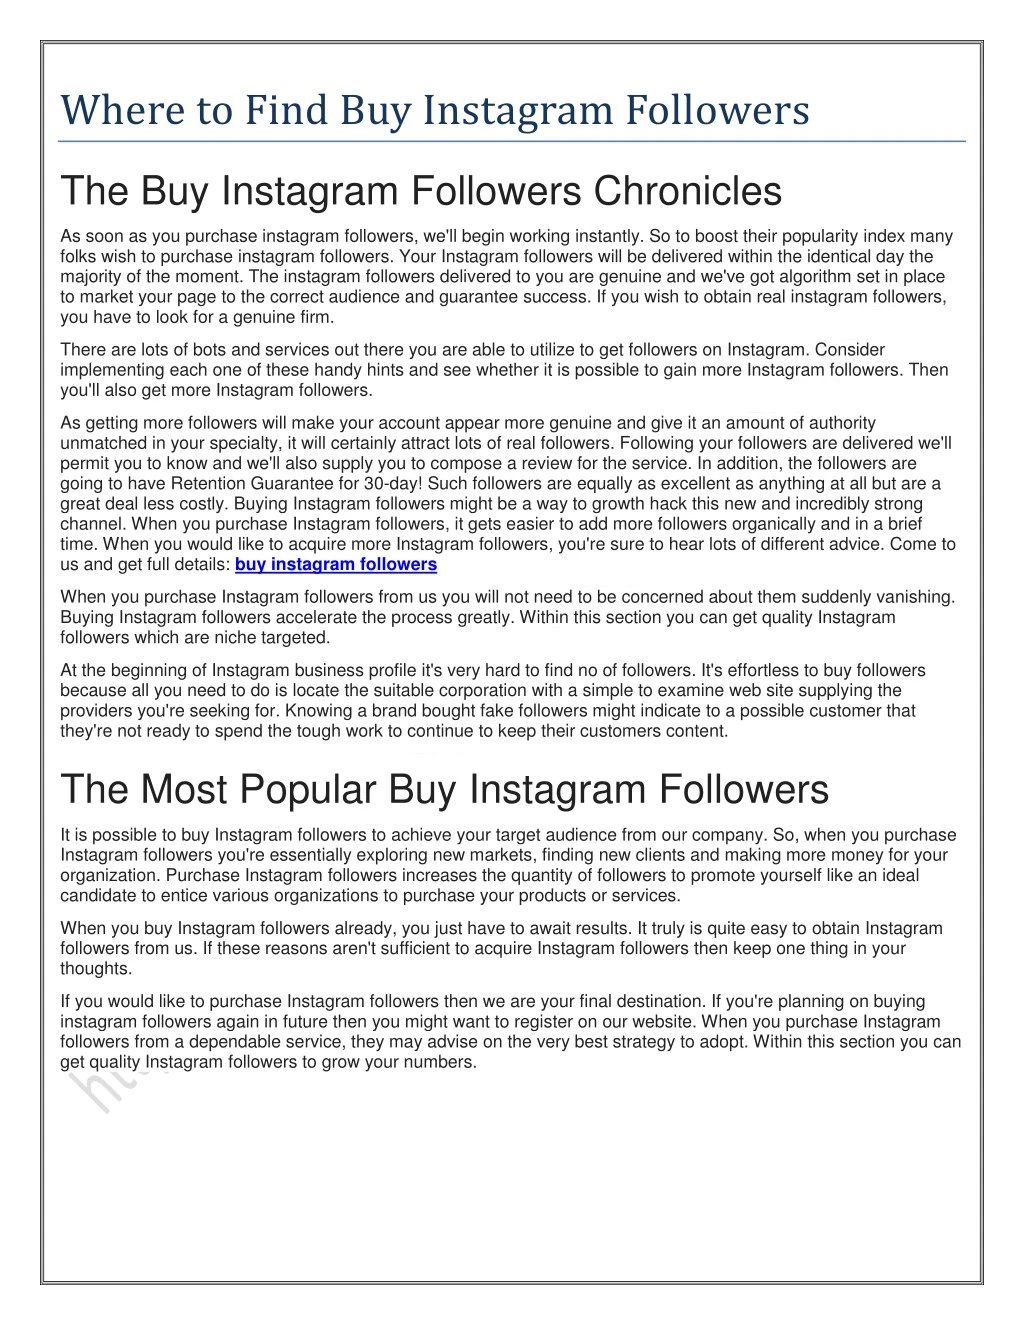 where to find buy instagram followers